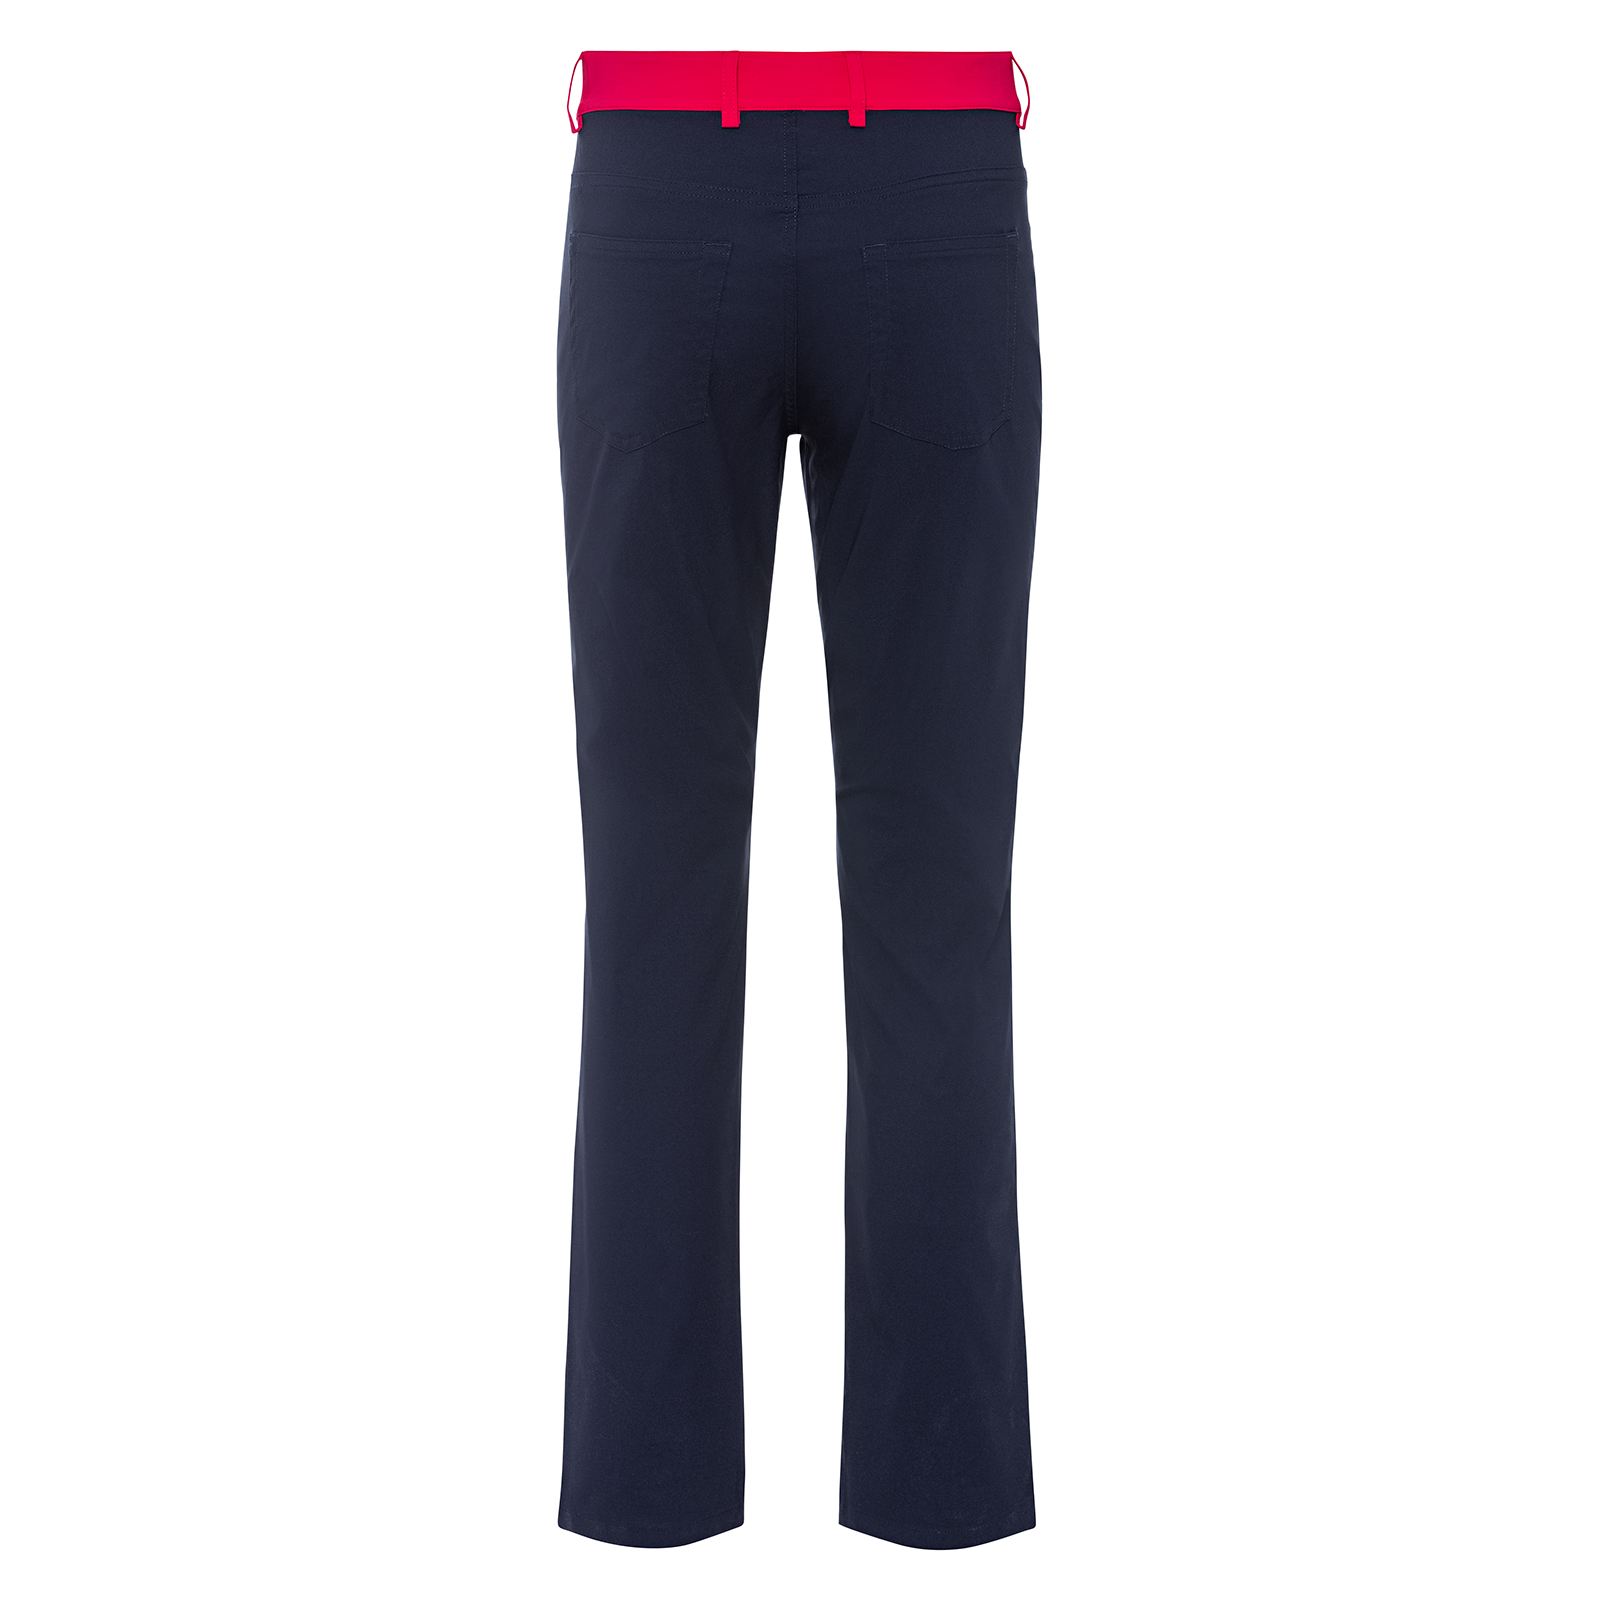 Attractive ladies' 7/8 golf trousers